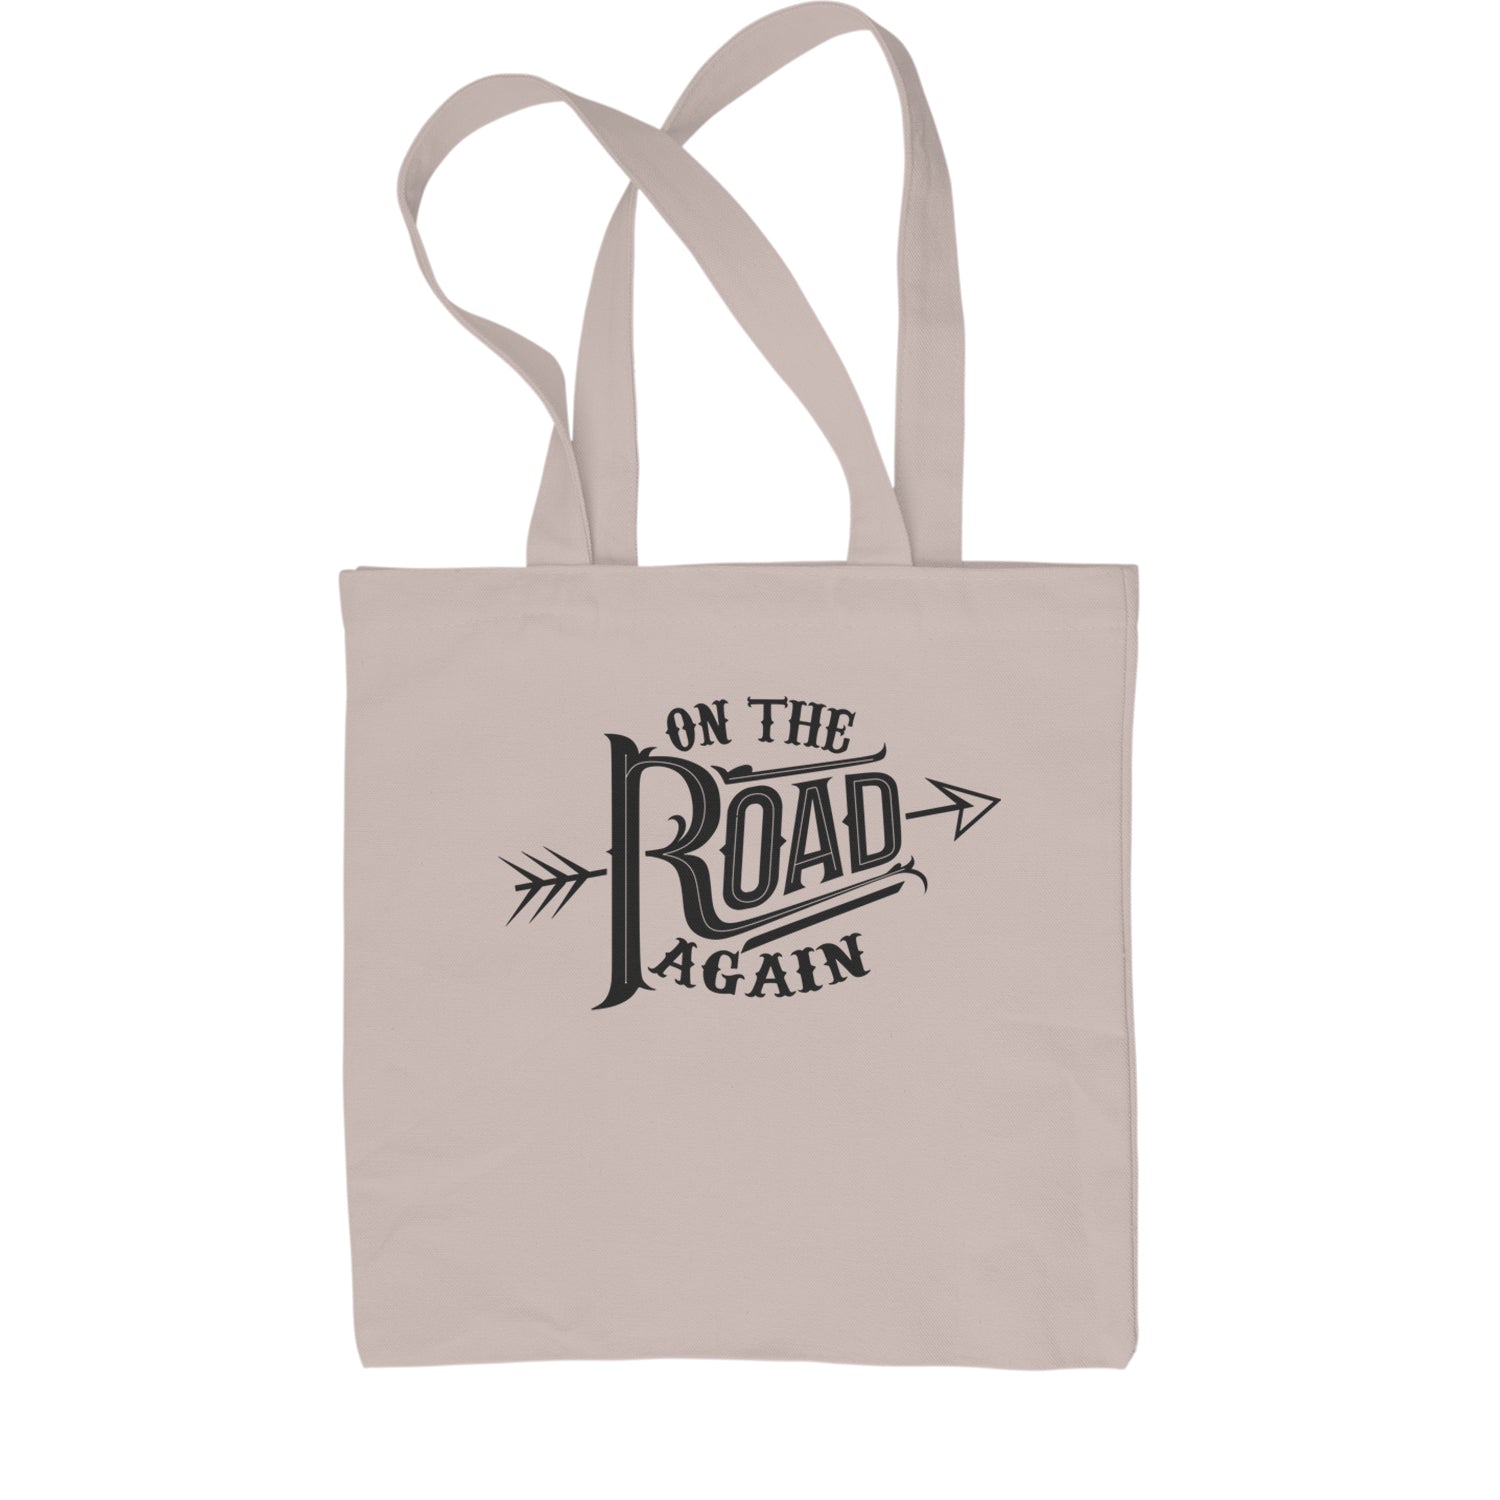 On The Road Again Hippy Country Music Shopping Tote Bag